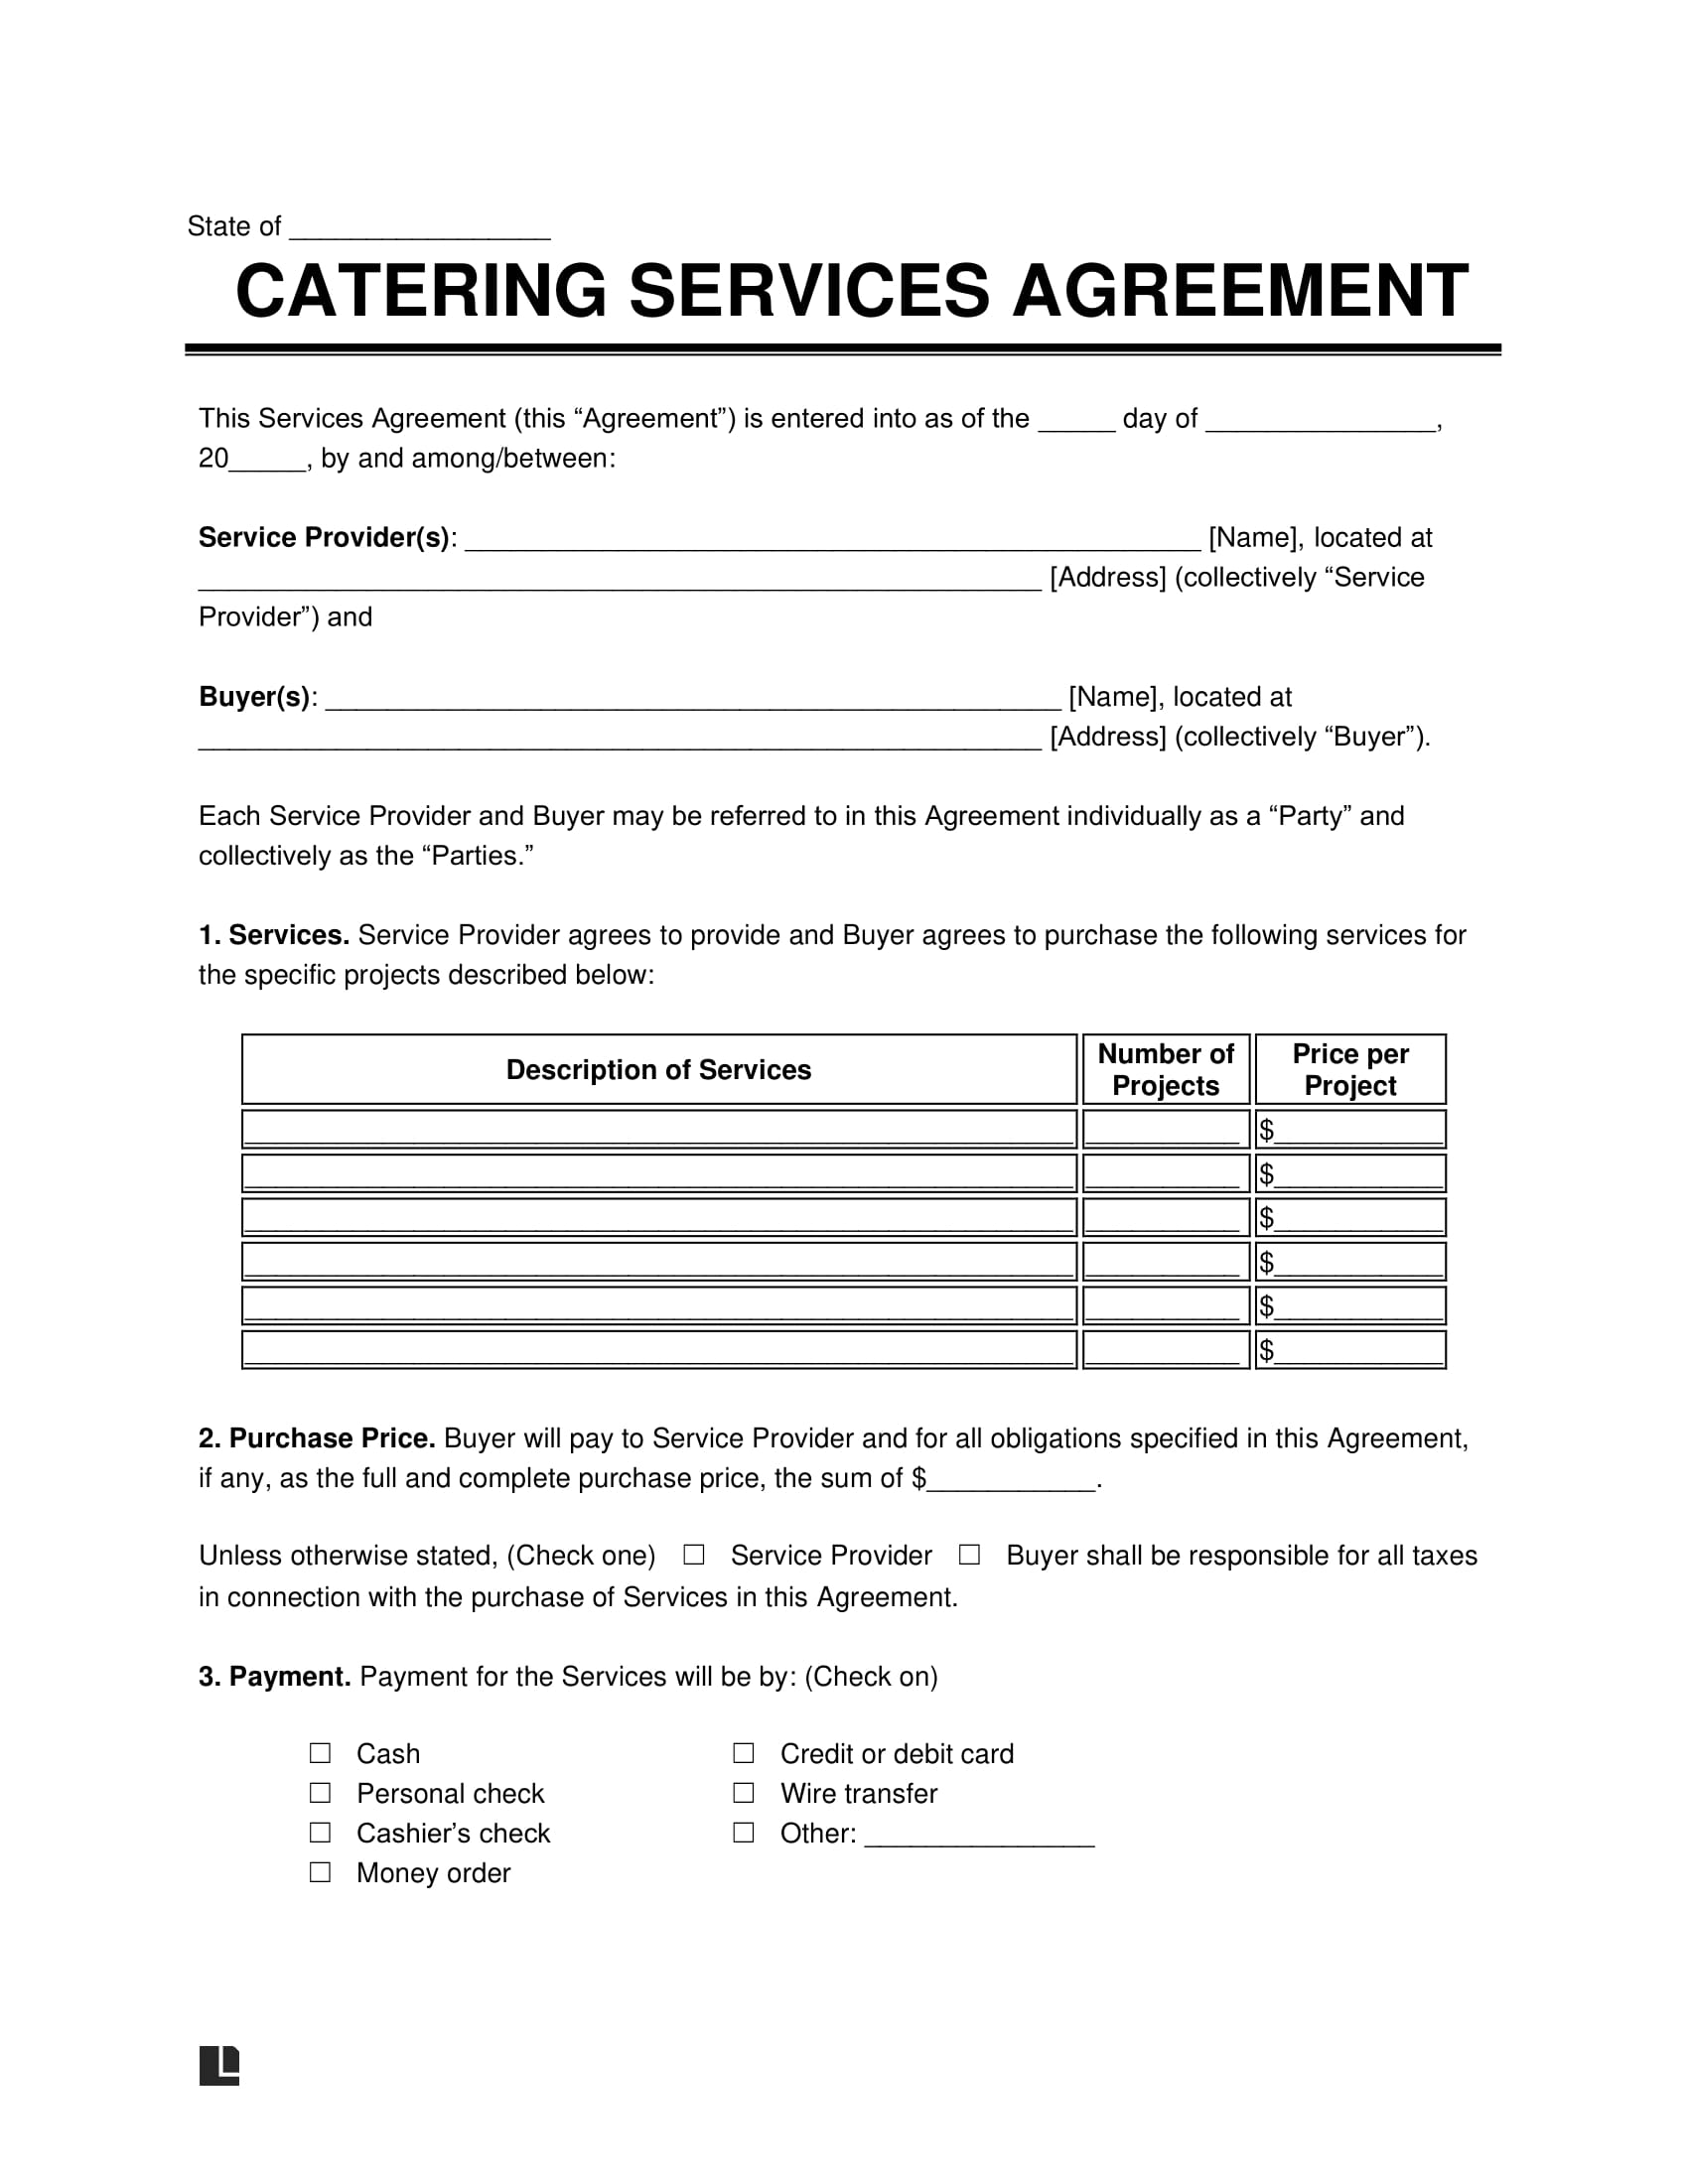 Catering contract screenshot